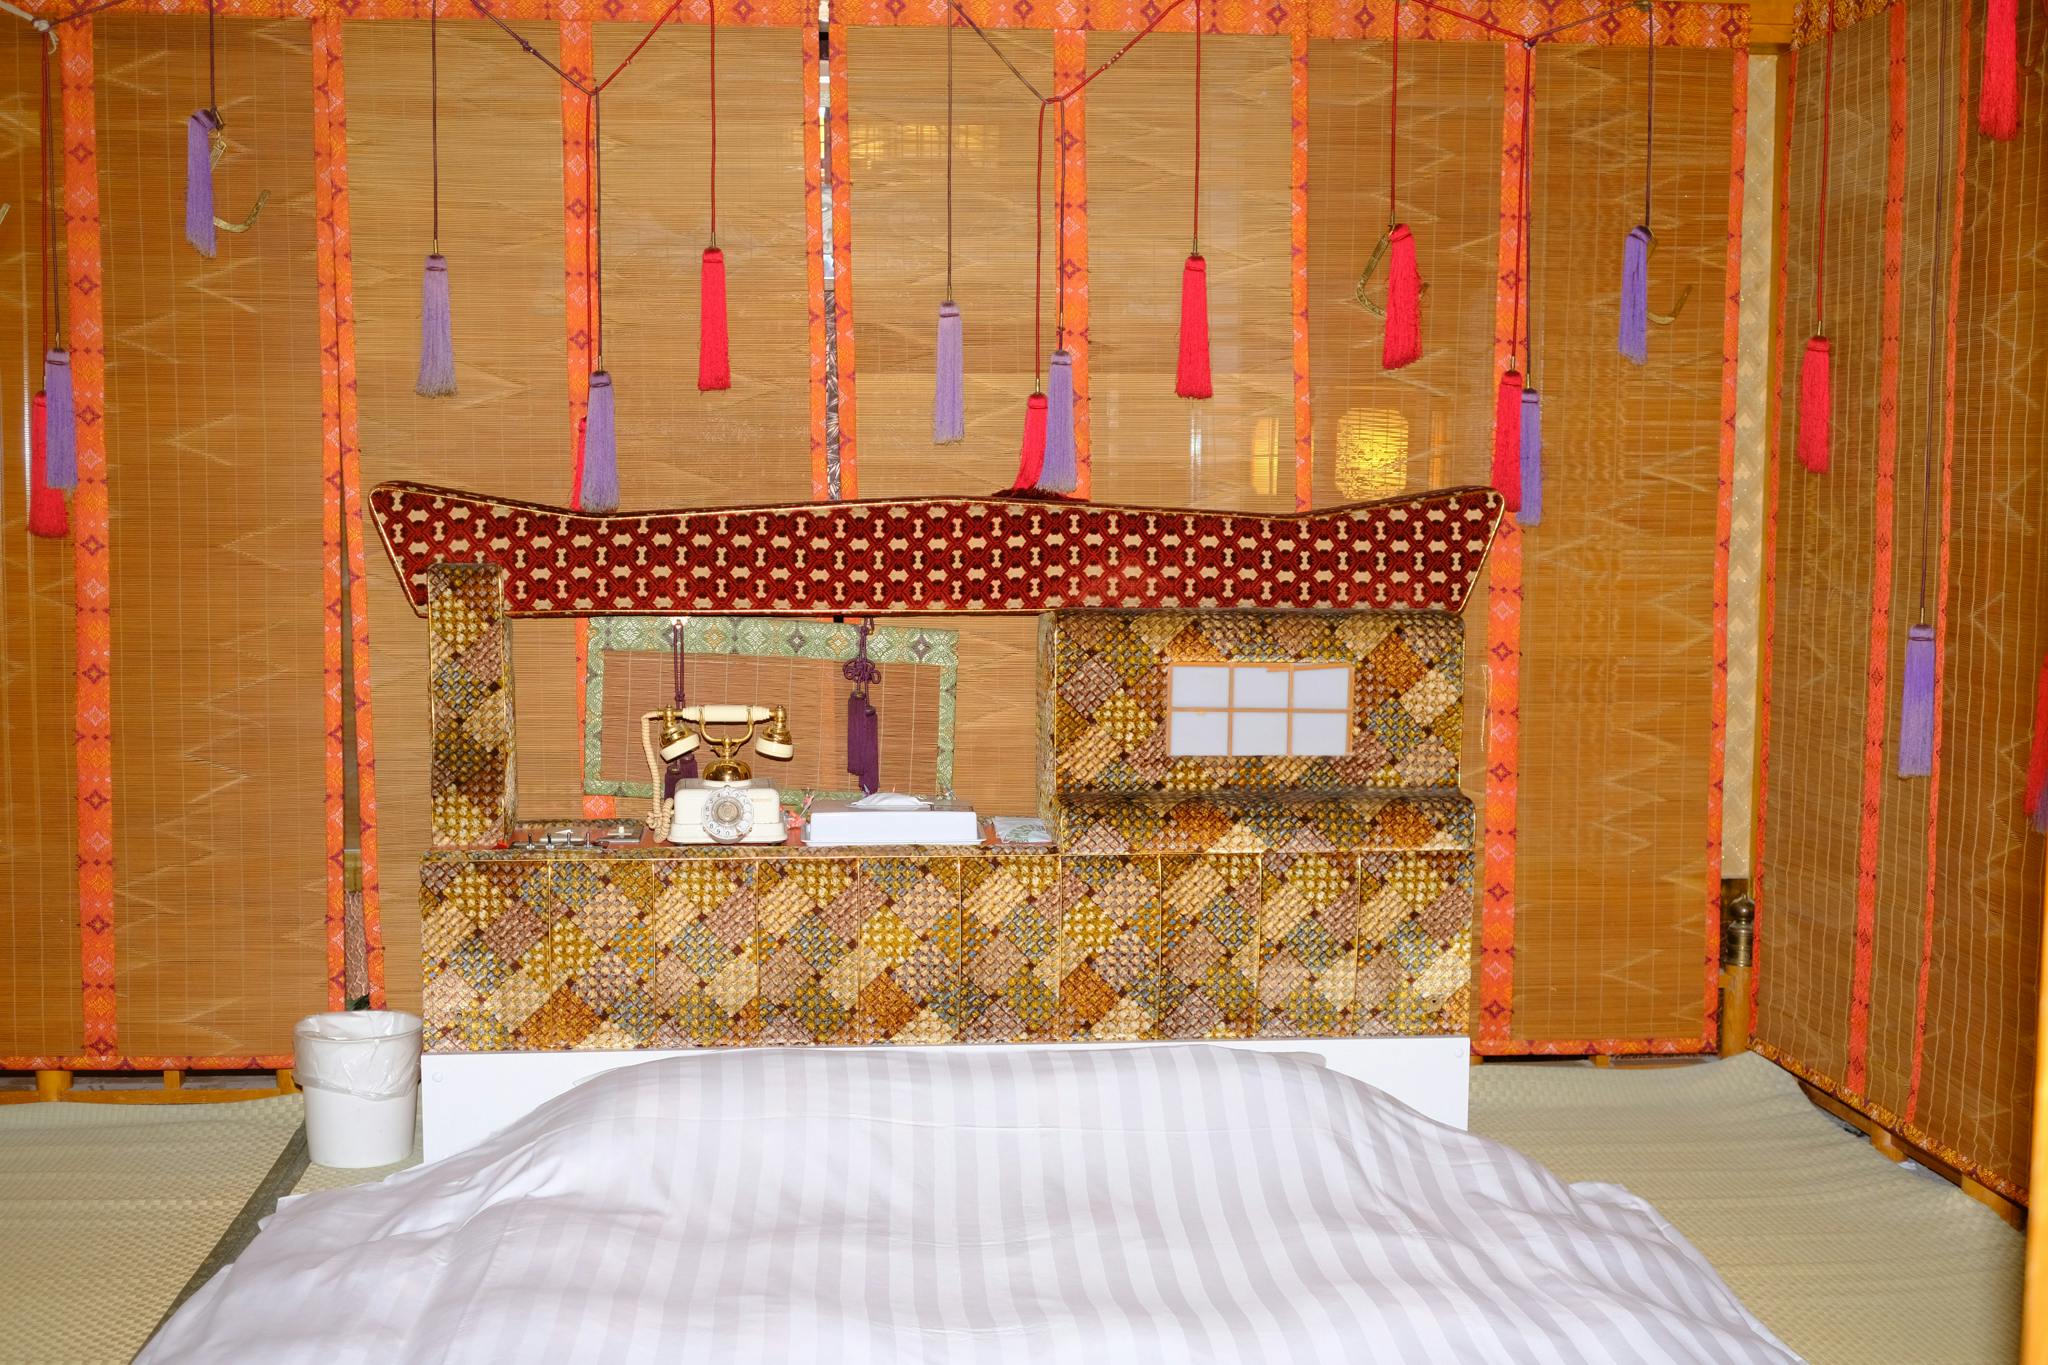 The bed in the historic themed 'Japanese Room' at Hotel Famy Love Hotel